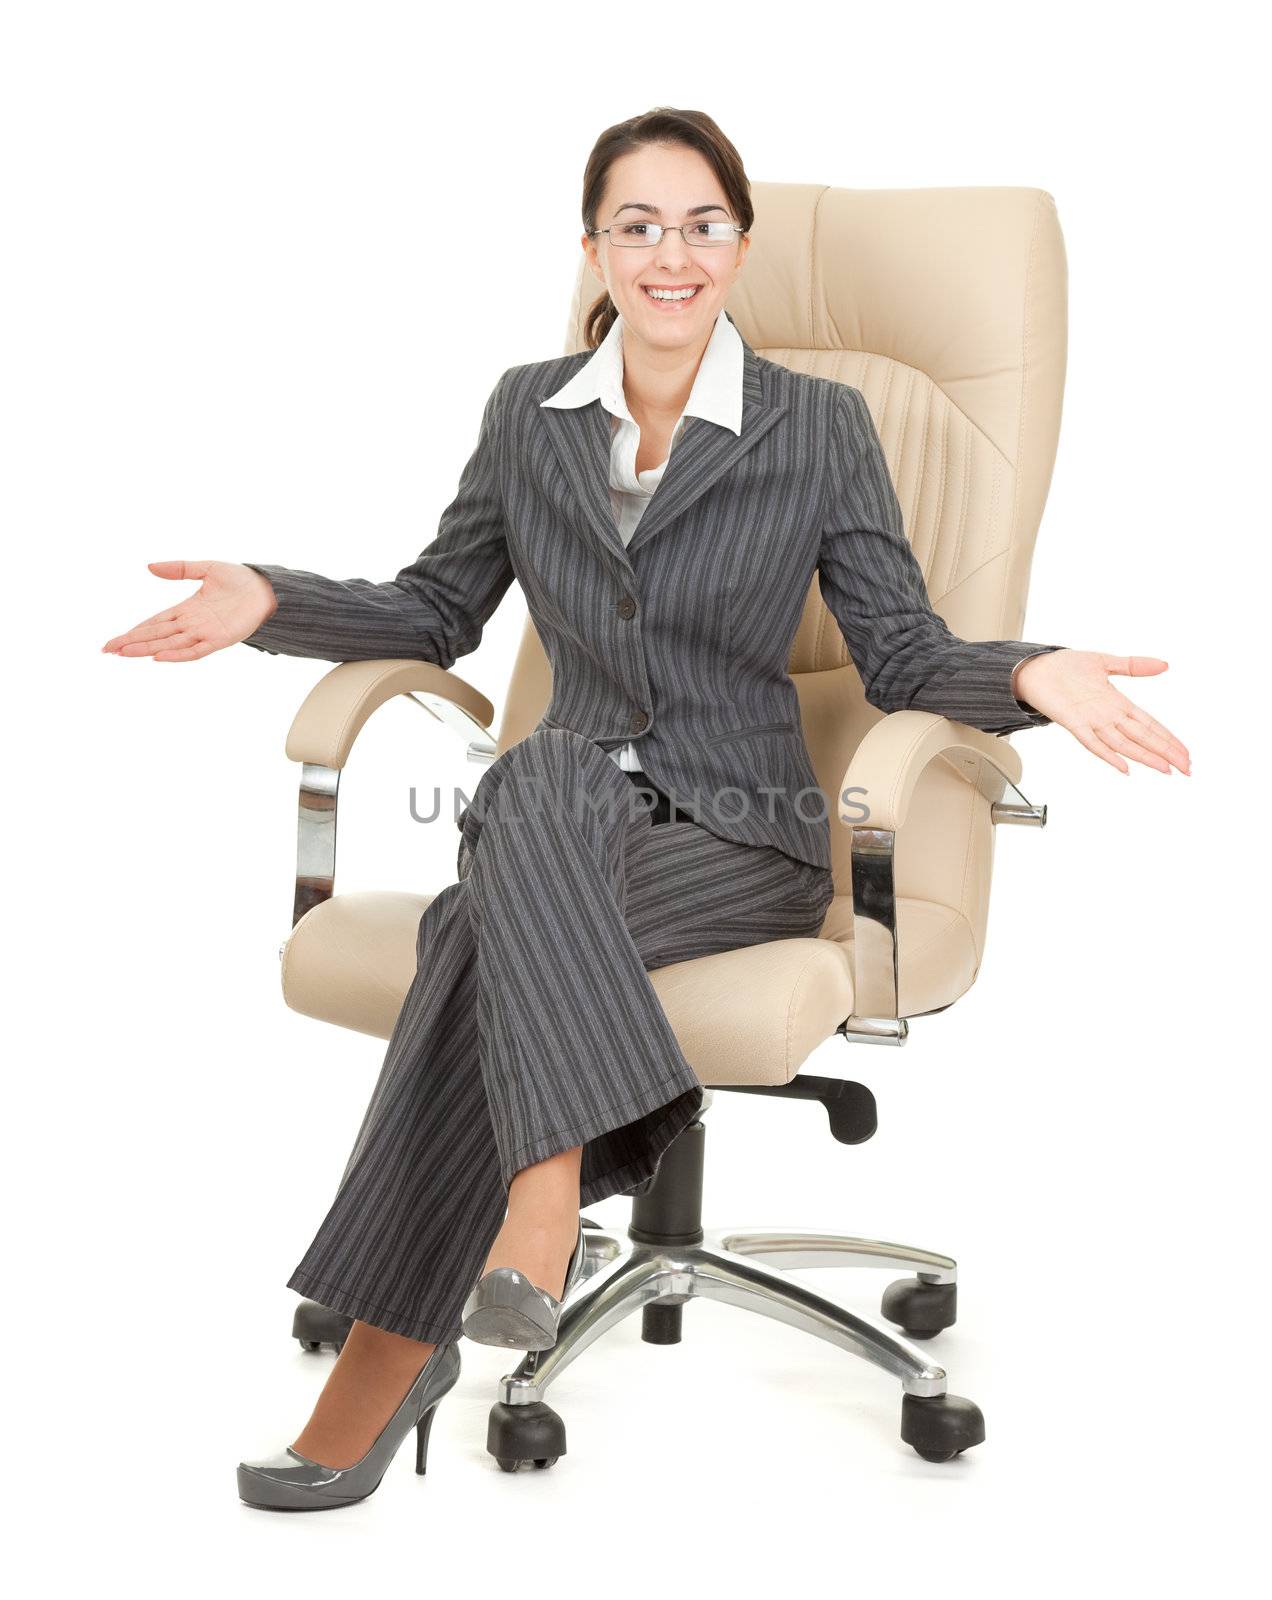 portrait of a business woman on white background